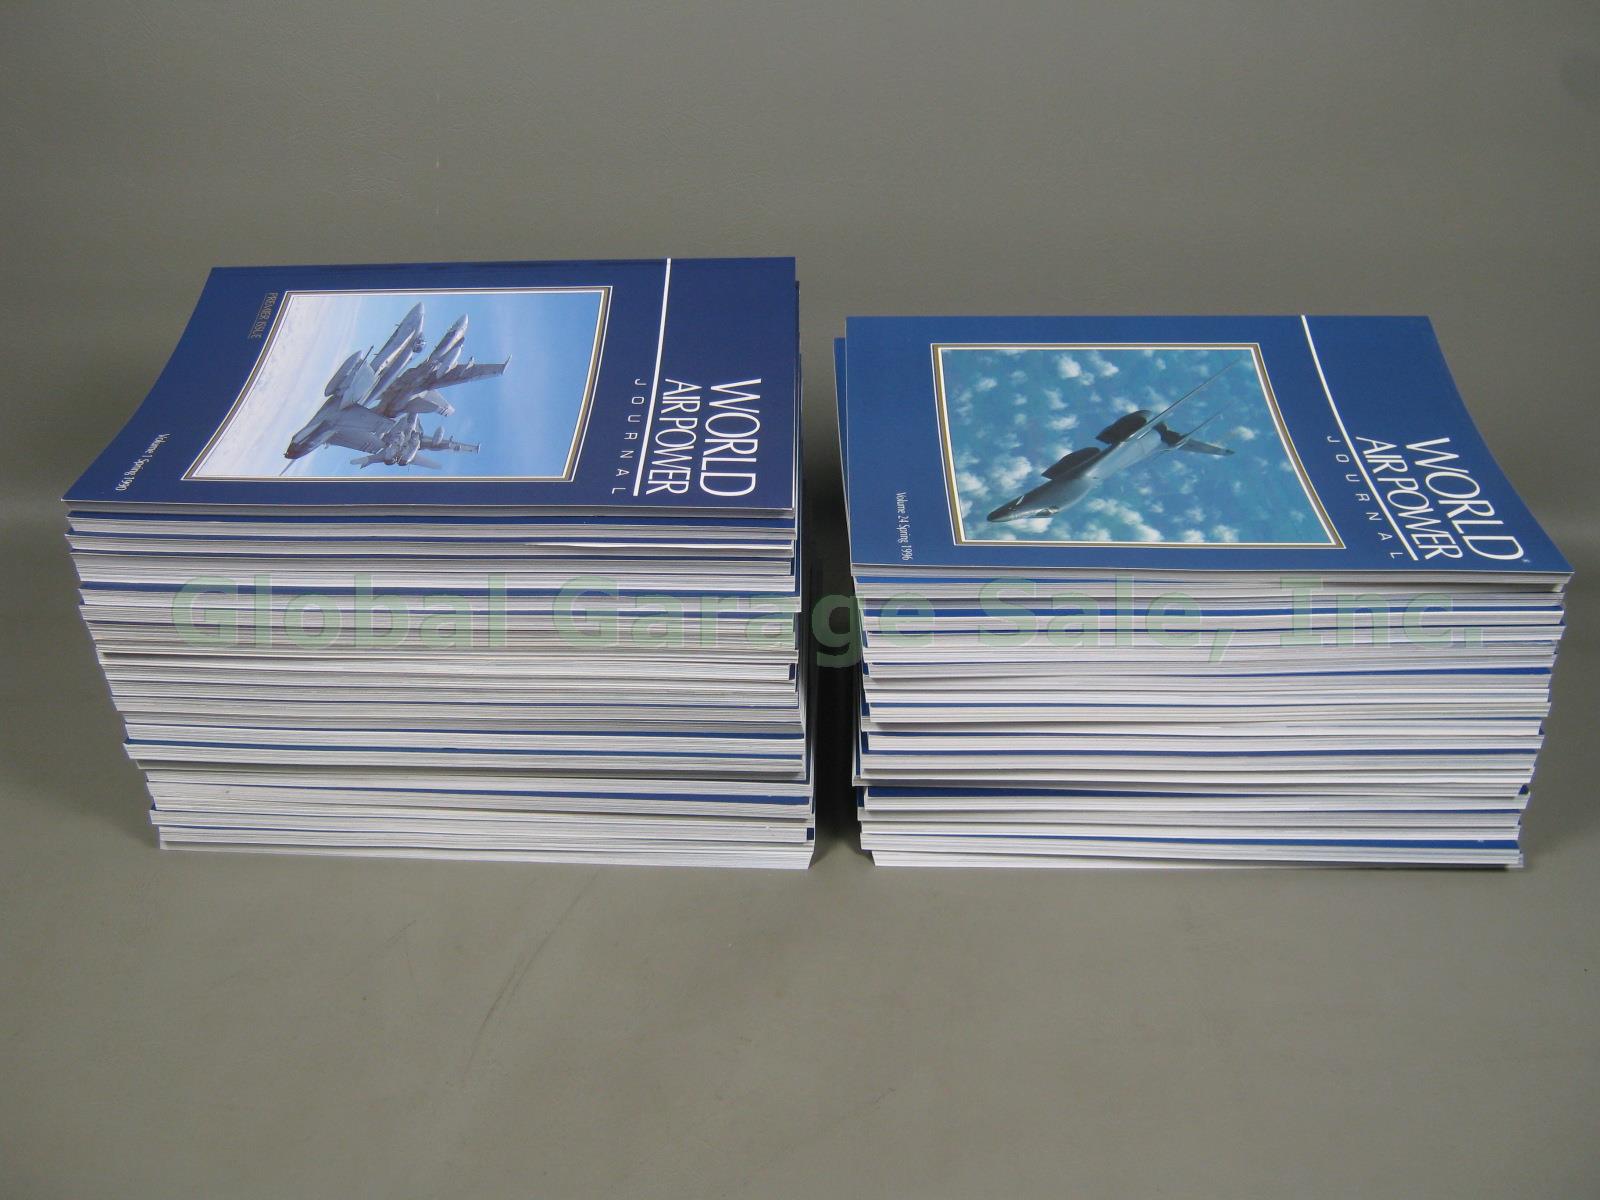 Complete 43 Volume Set World Air Power Journal Collection Lot +Indexes 1990-2000 4